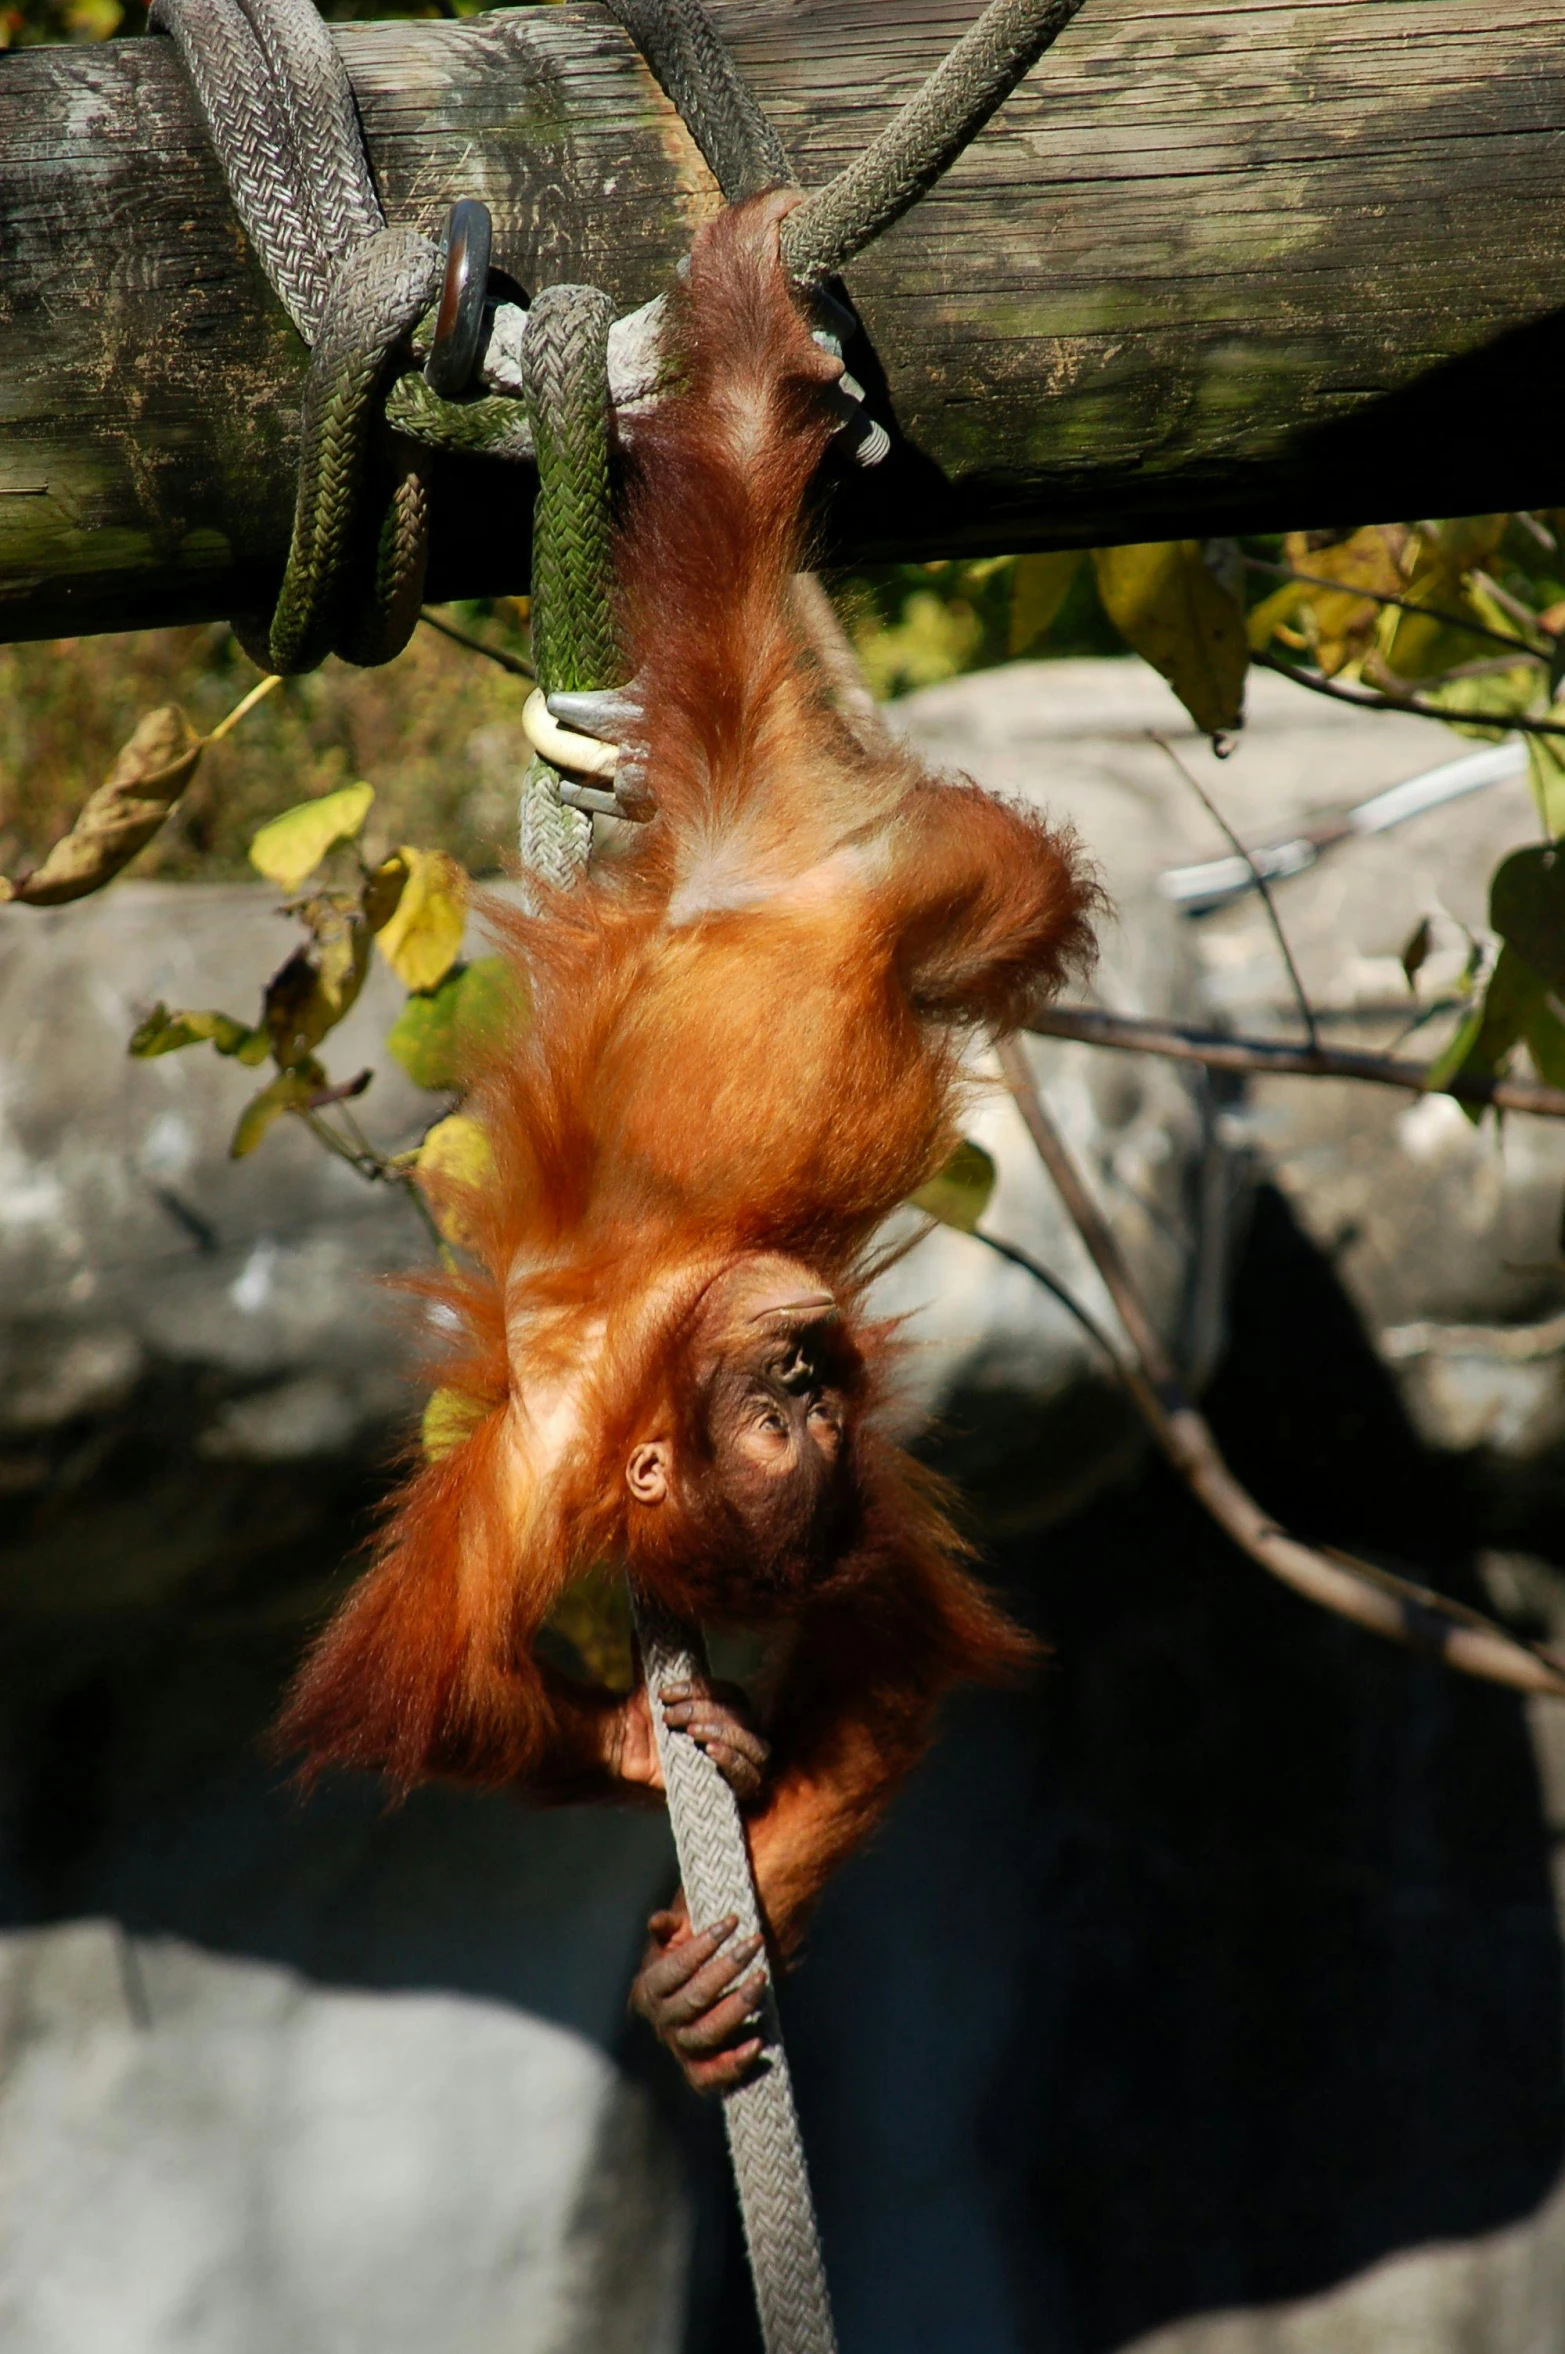 a baby oranguel hanging from a tree branch, an album cover, pexels contest winner, sumatraism, eating rotting fruit, in the zoo exhibit, hanging rope, long orange hair floating on air